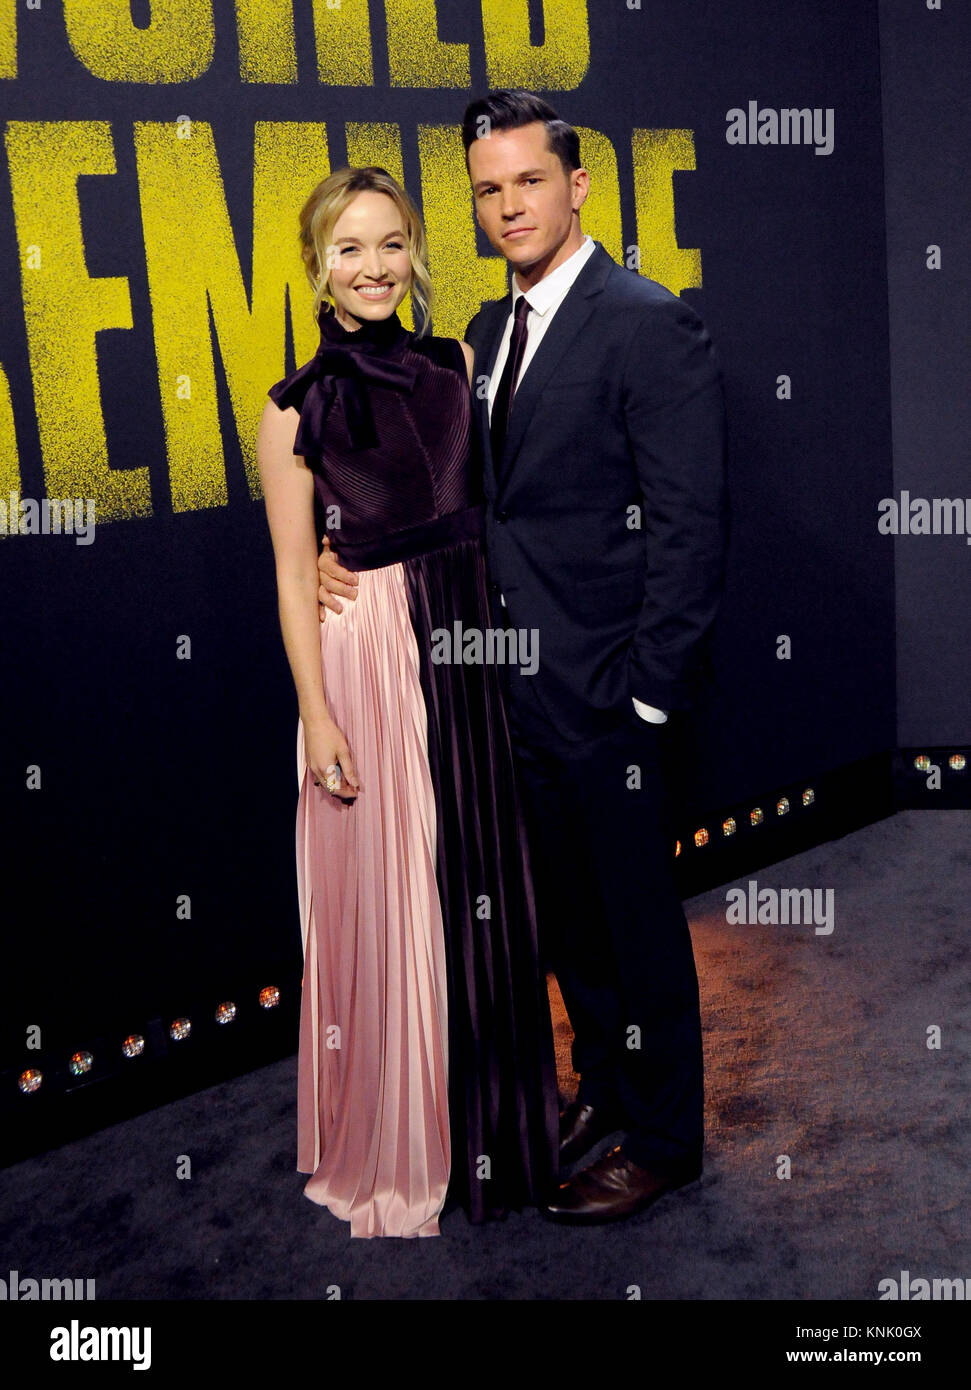 Hollywood, USA. 12th Dec, 2017. (L-R) Actress Kelley Jakle and actor Mark Hapka attend the premiere of Universal Pictures' 'Pitch Perfect 3' at the Dolby Theatre on December 12, 2017 in Hollywood, California. Credit: Barry King/Alamy Live News Stock Photo